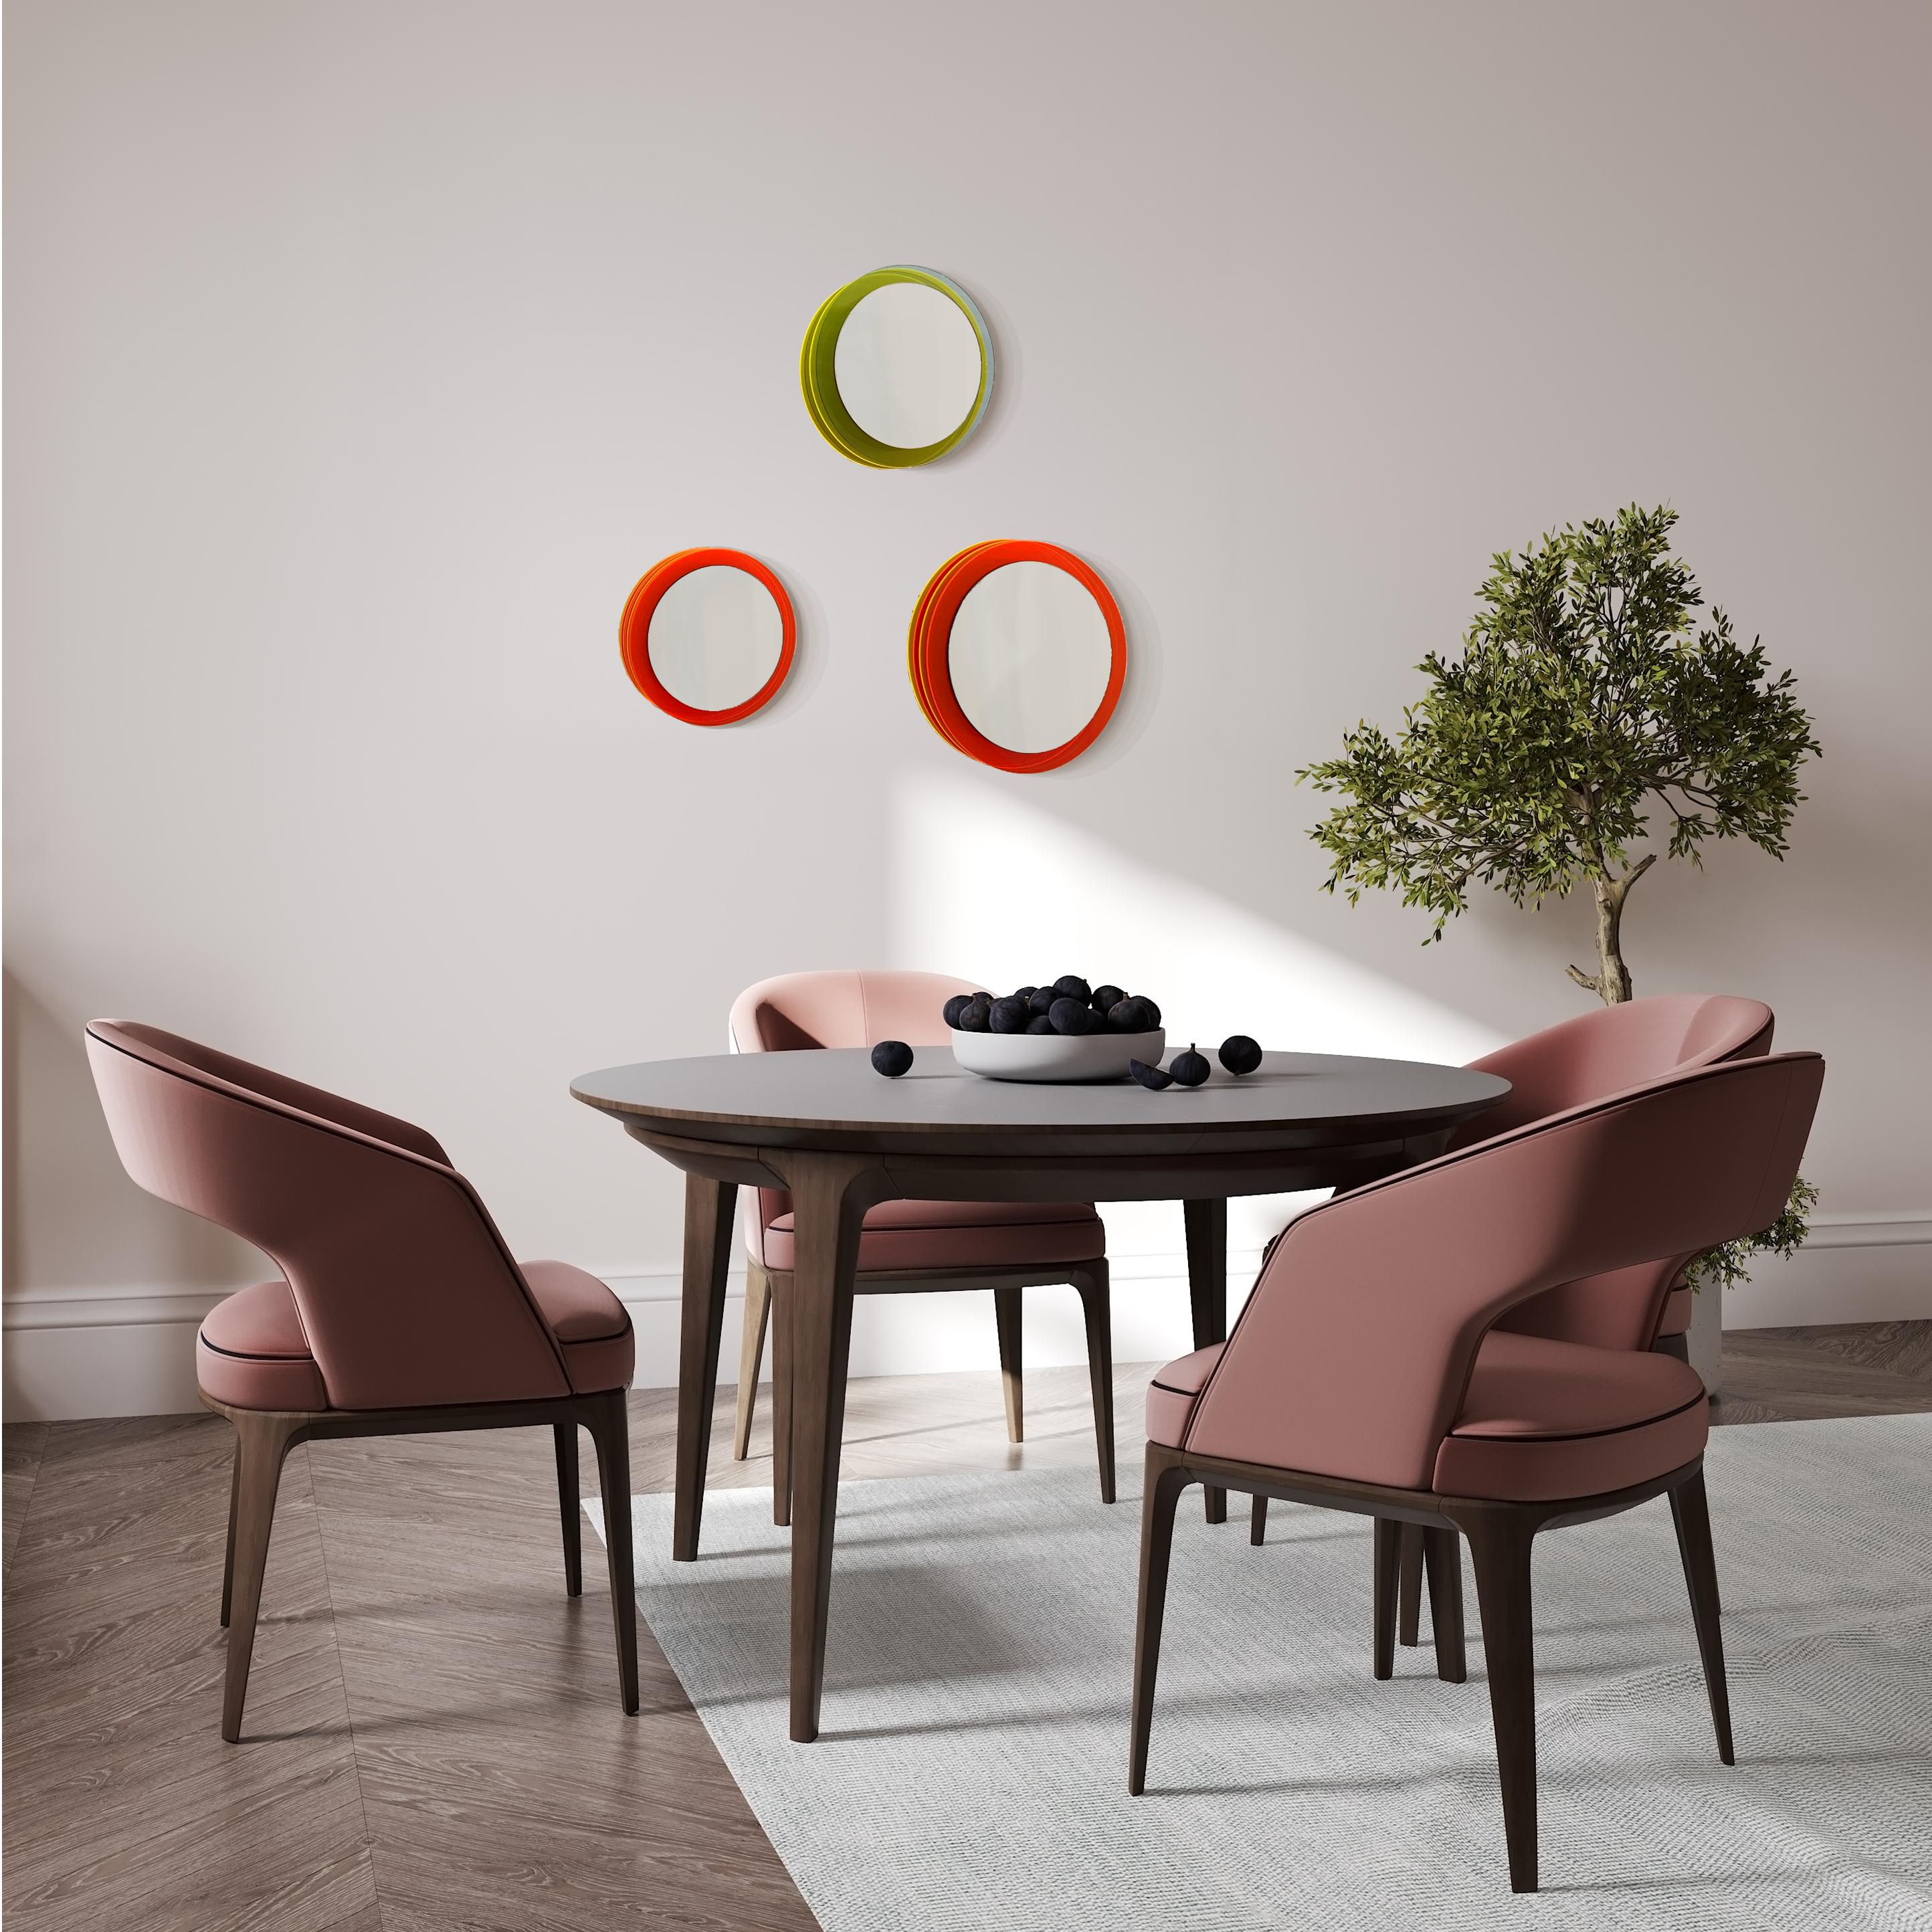 Reduced forms create fascinating wall sculptures, a play with translucently, ambient light and color.

The mirror objects float in front of the wall and create fascinating sculptures full of positive energy through color, light and translucency